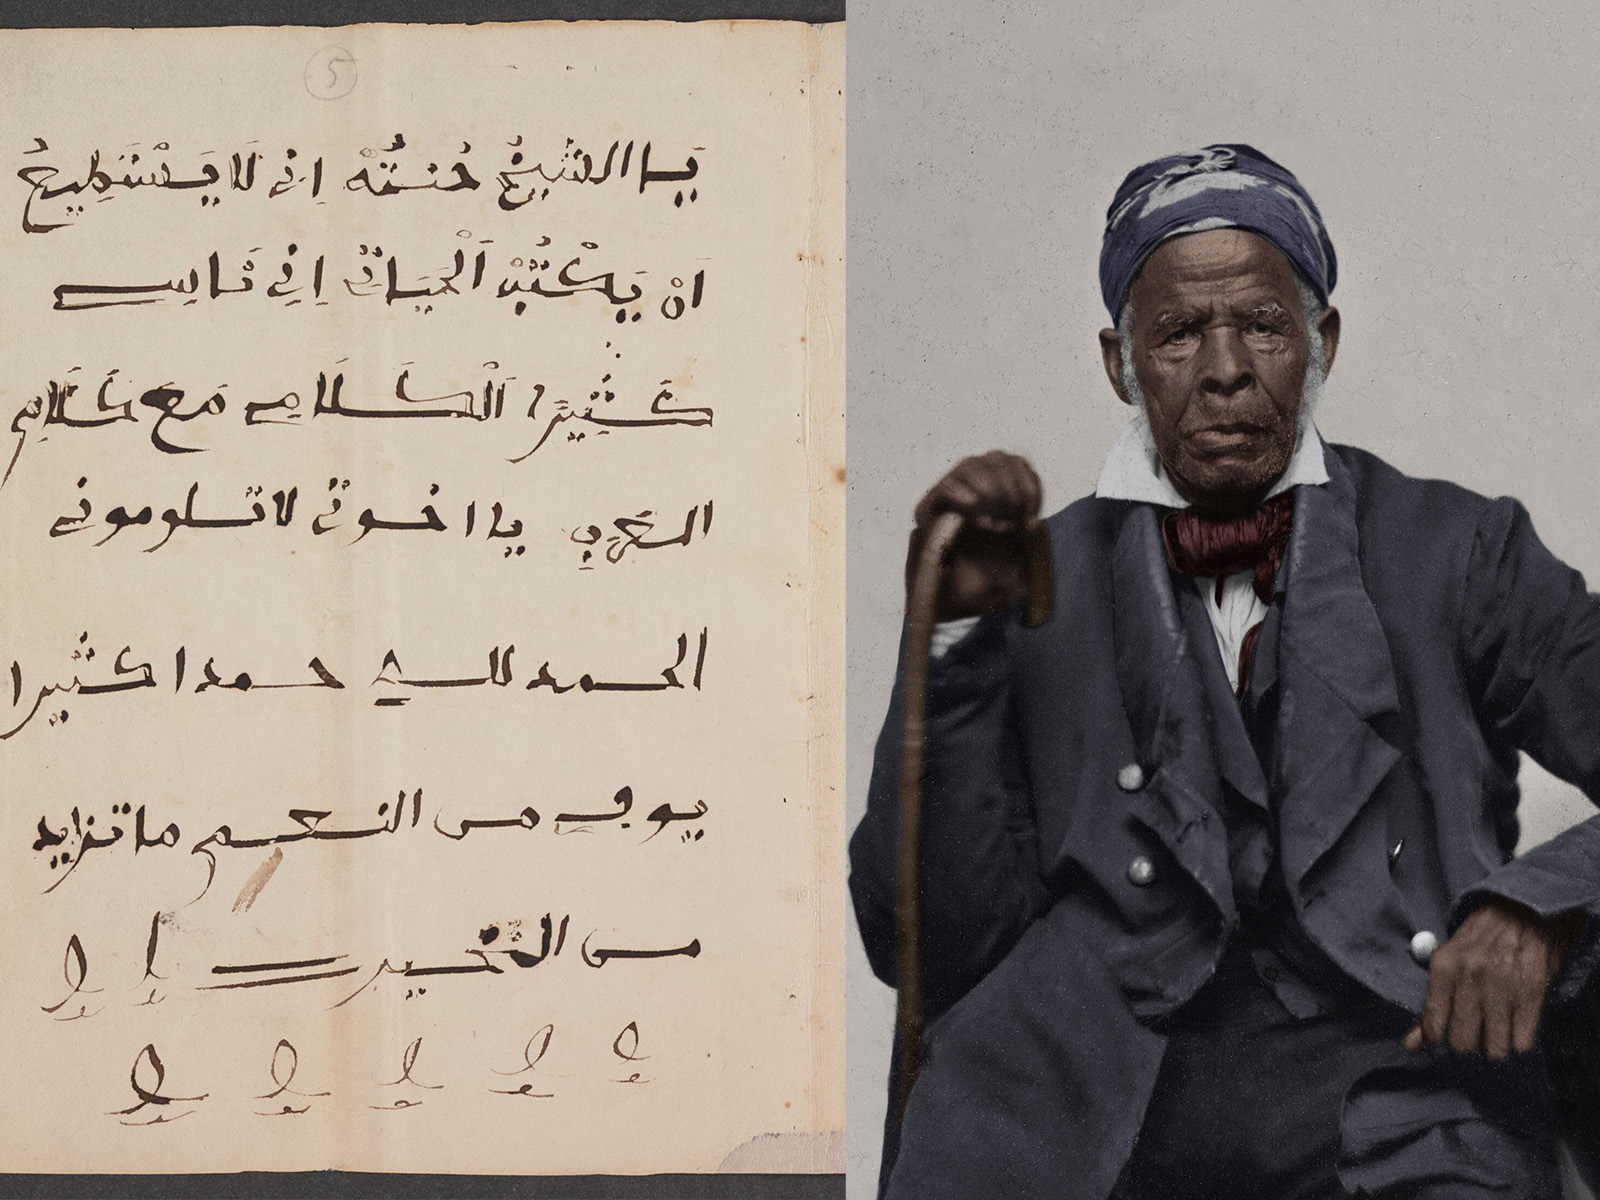 A page of Omar ibn Said’s autobiography, written in Arabic in 1831, and a restored, colorized portrait of Omar ibn Said, right, around the 1850s. Page courtesy of LOC; Photo courtesy of Yale University Library